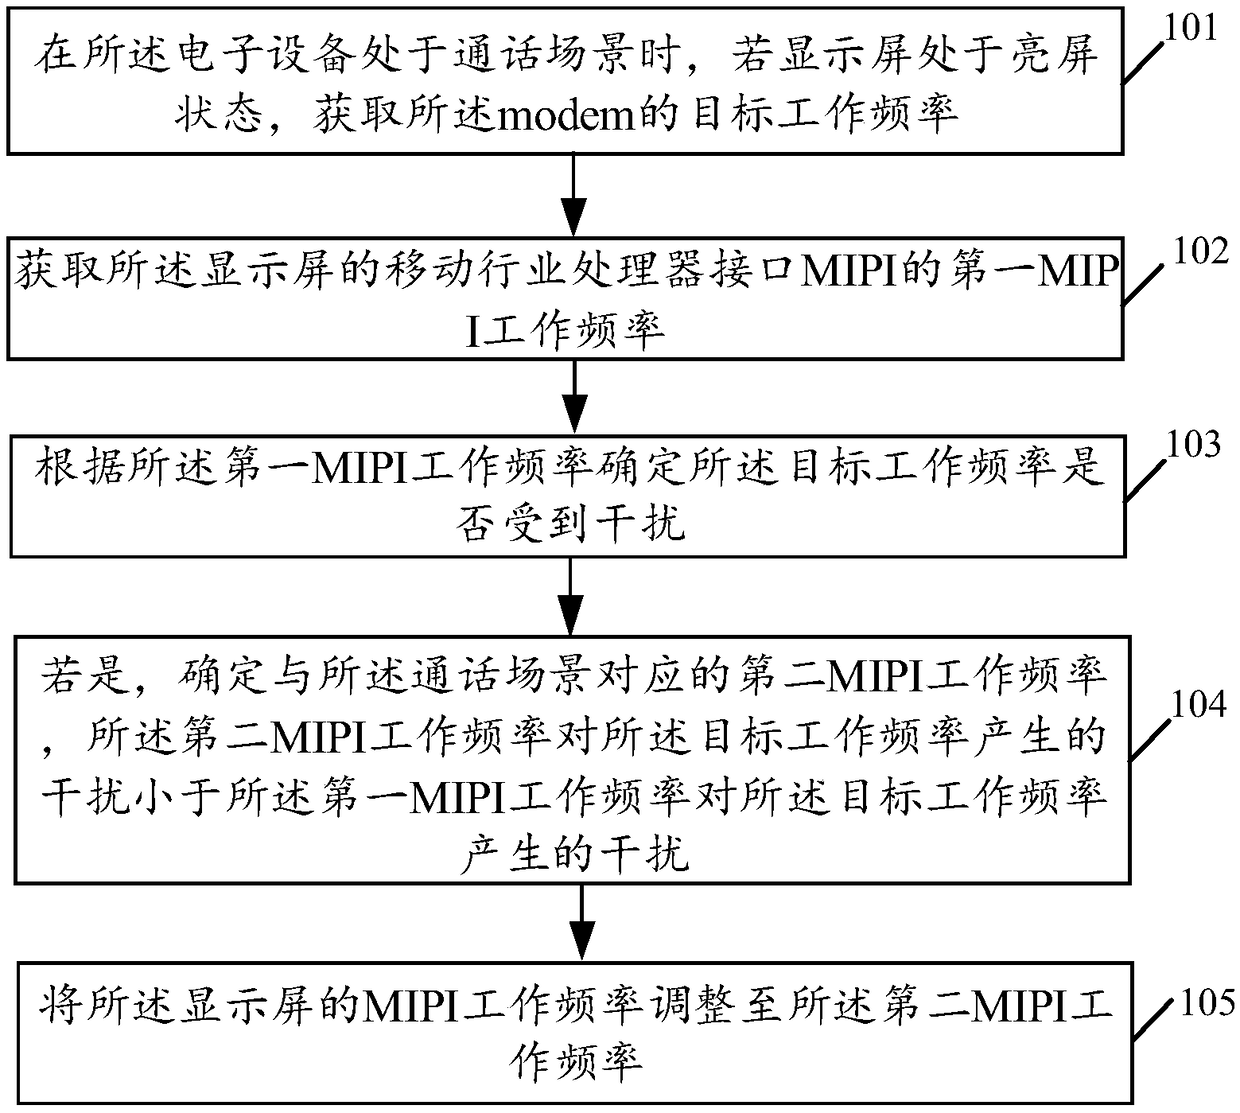 Electromagnetic interference control method and related products